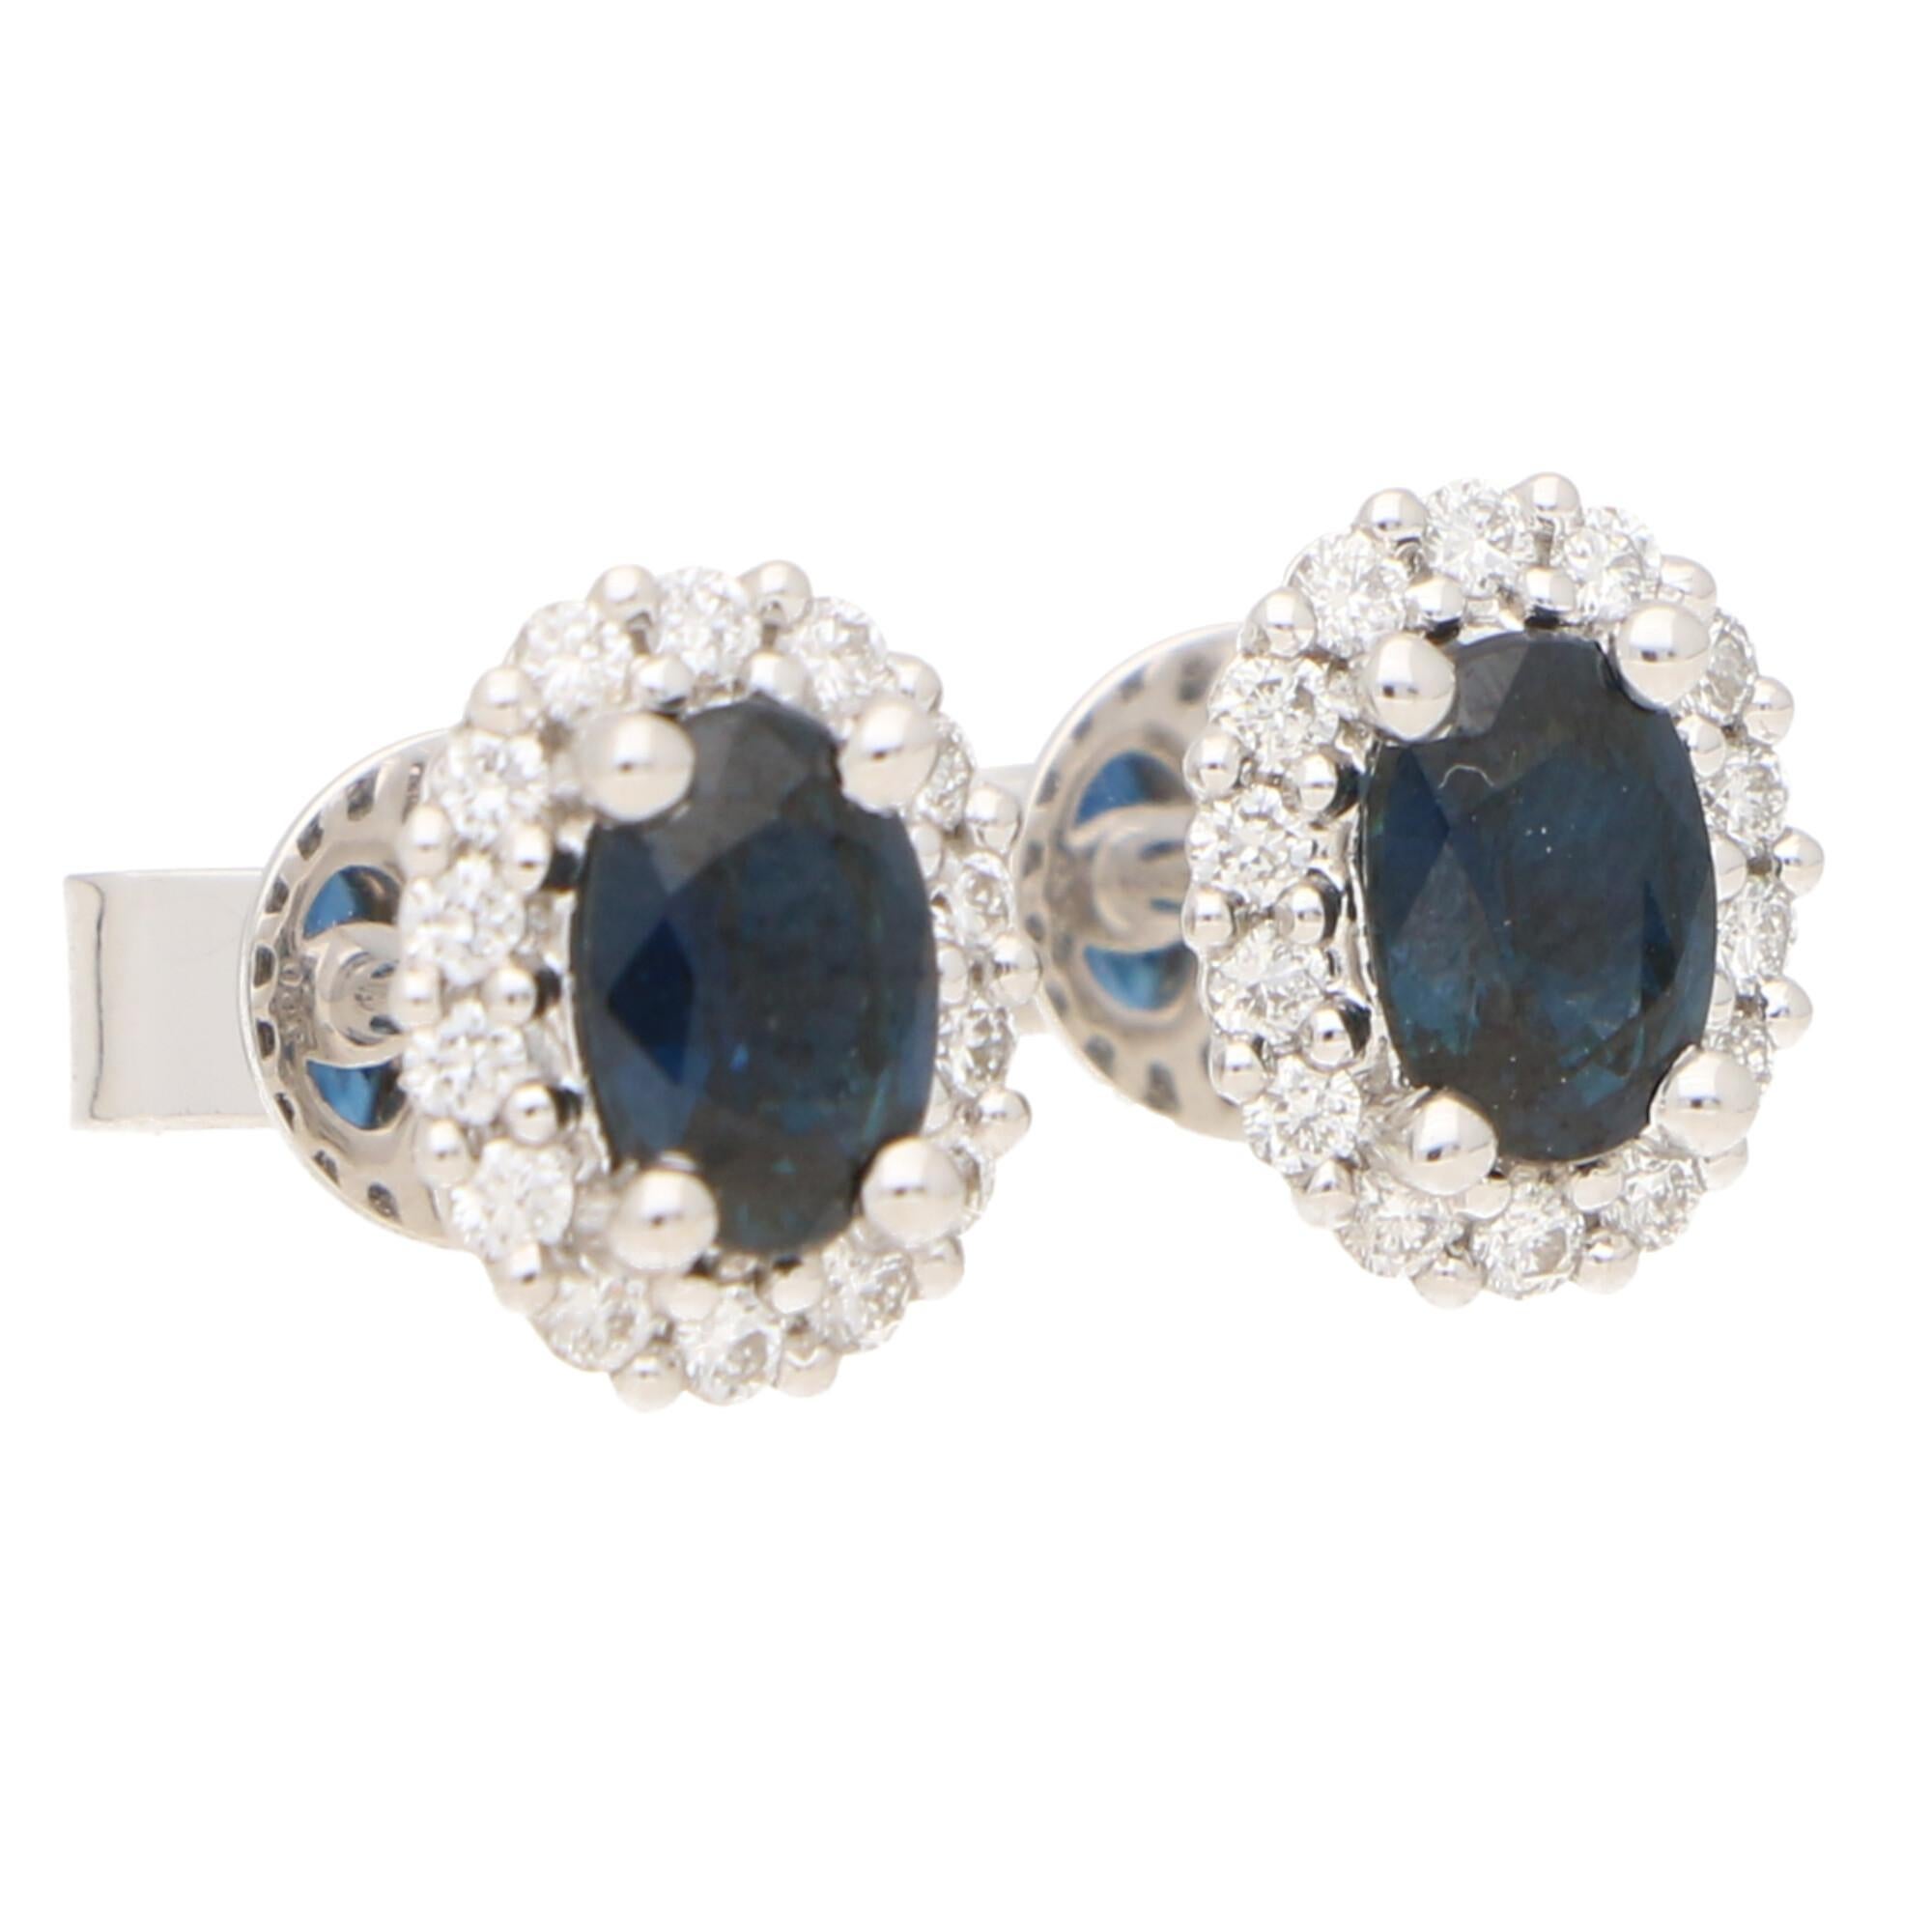 A lovely pair of sapphire and diamond oval halo earrings set in 18k white gold.

Each earring centrally features a beautiful deep blue coloured oval shaped sapphire surrounded by a halo of 16 round brilliant-cut diamonds. All of the stones are set